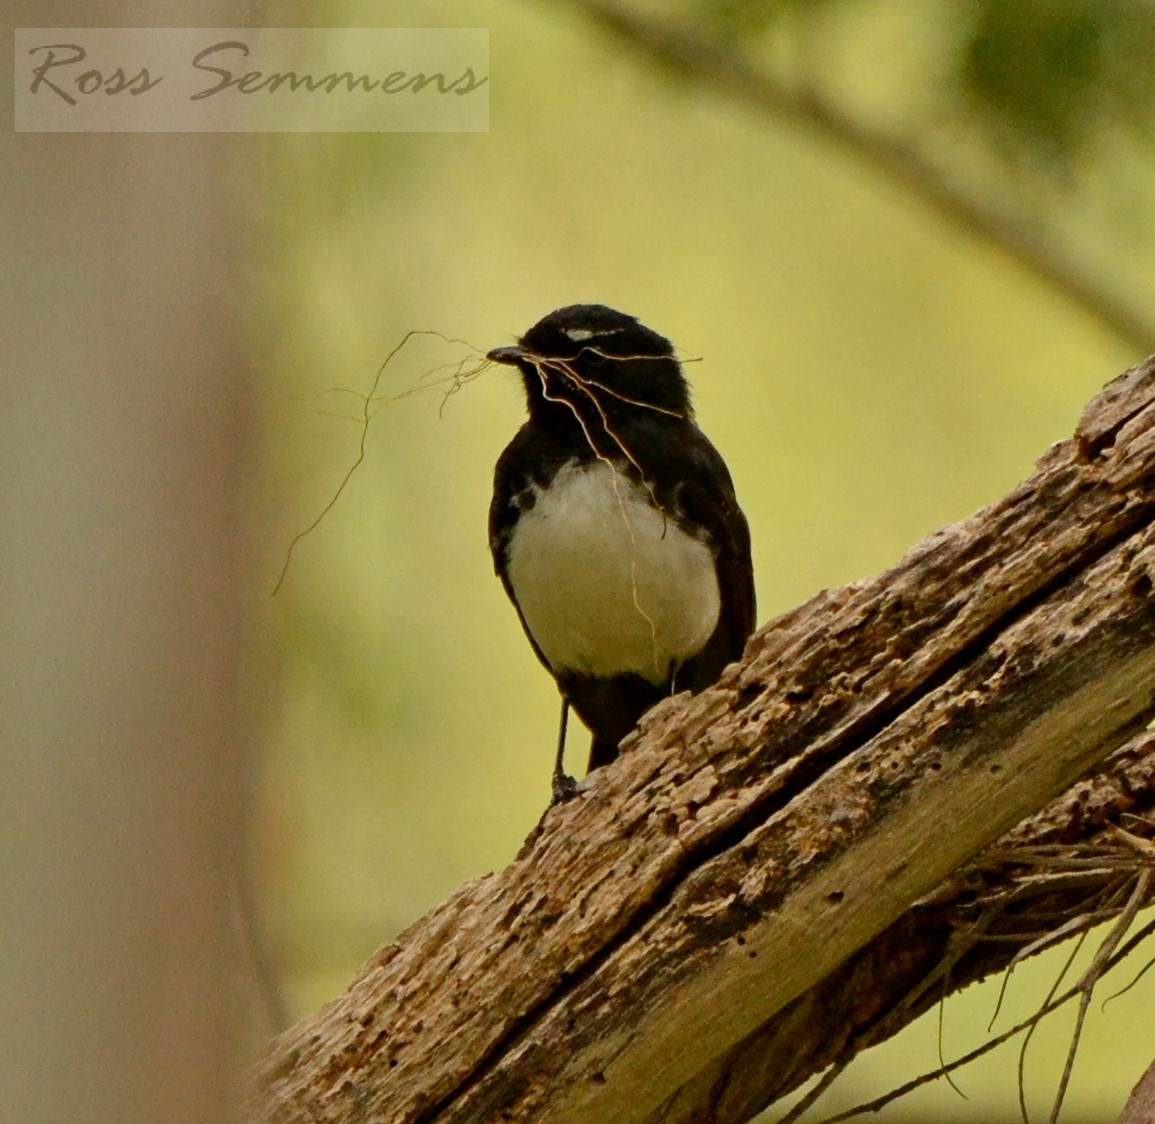 Willie-wagtail - ross semmens